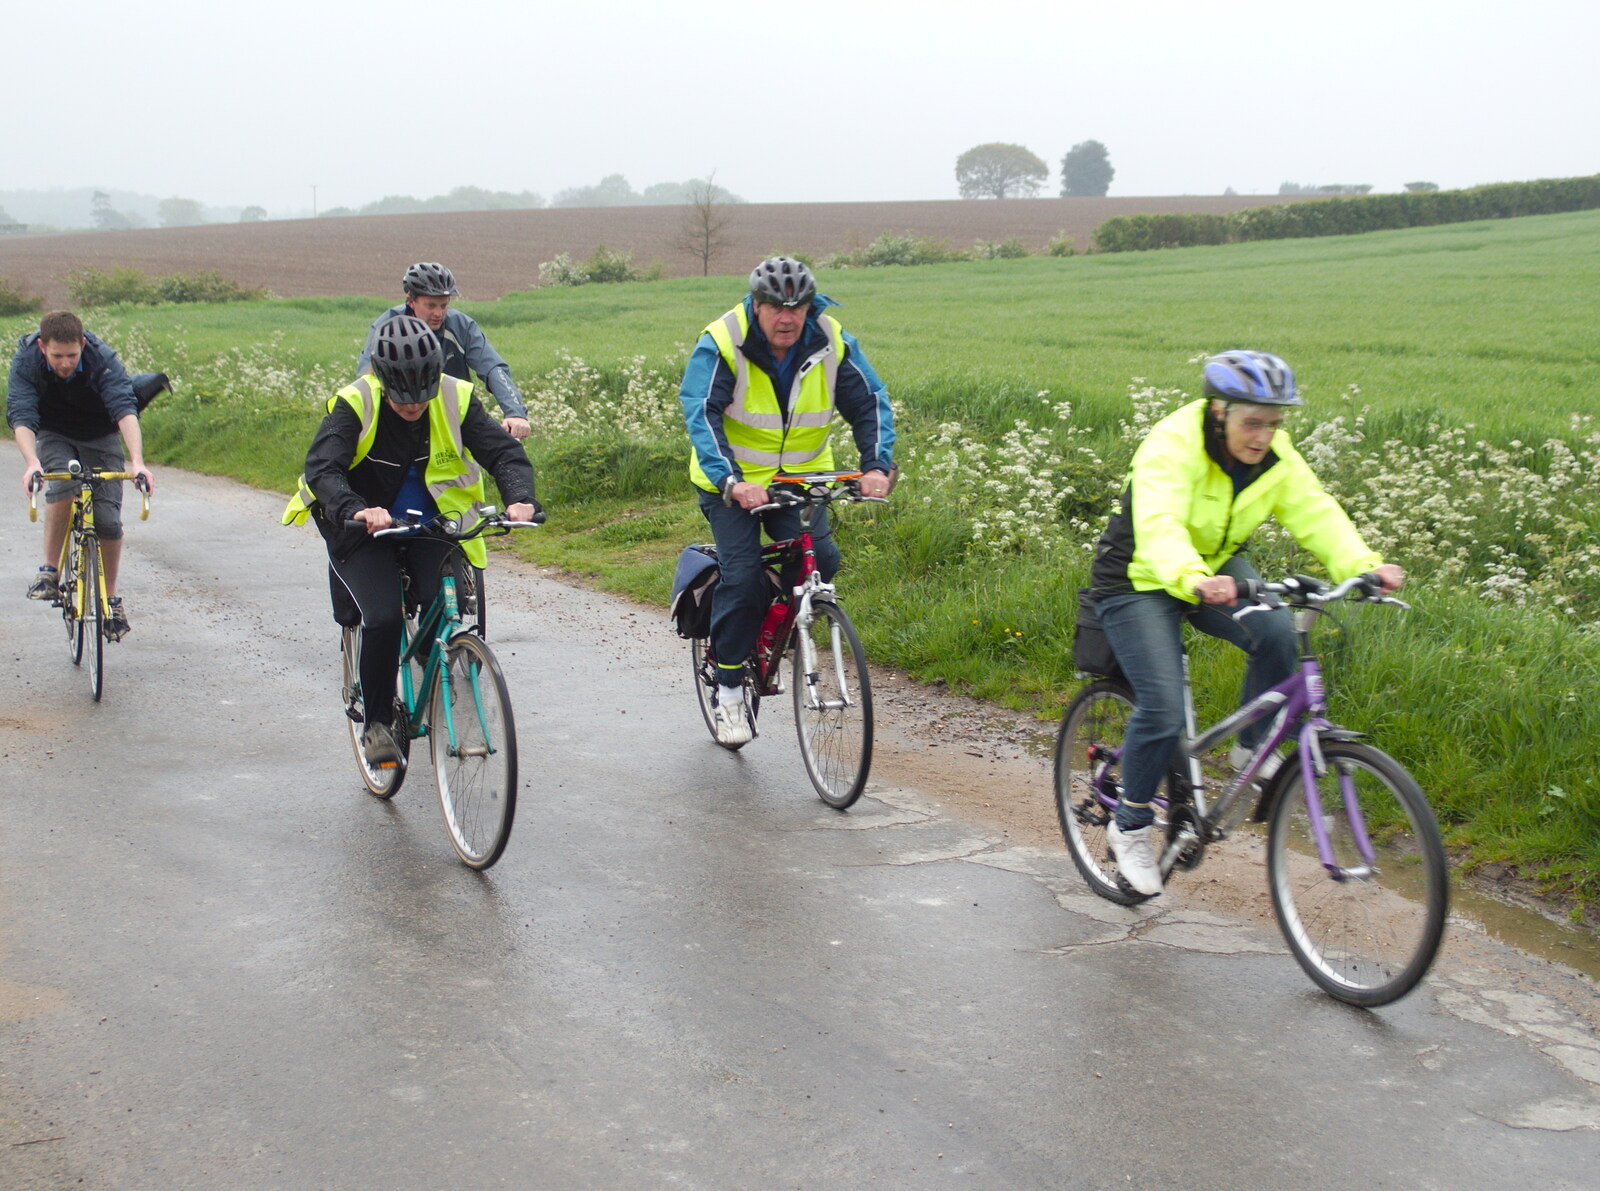 Alan and Spammy ride past from The BSCC at the Burston Crown, and the Oaksmere Re-opens, Brome, Suffolk - 1st May 2014